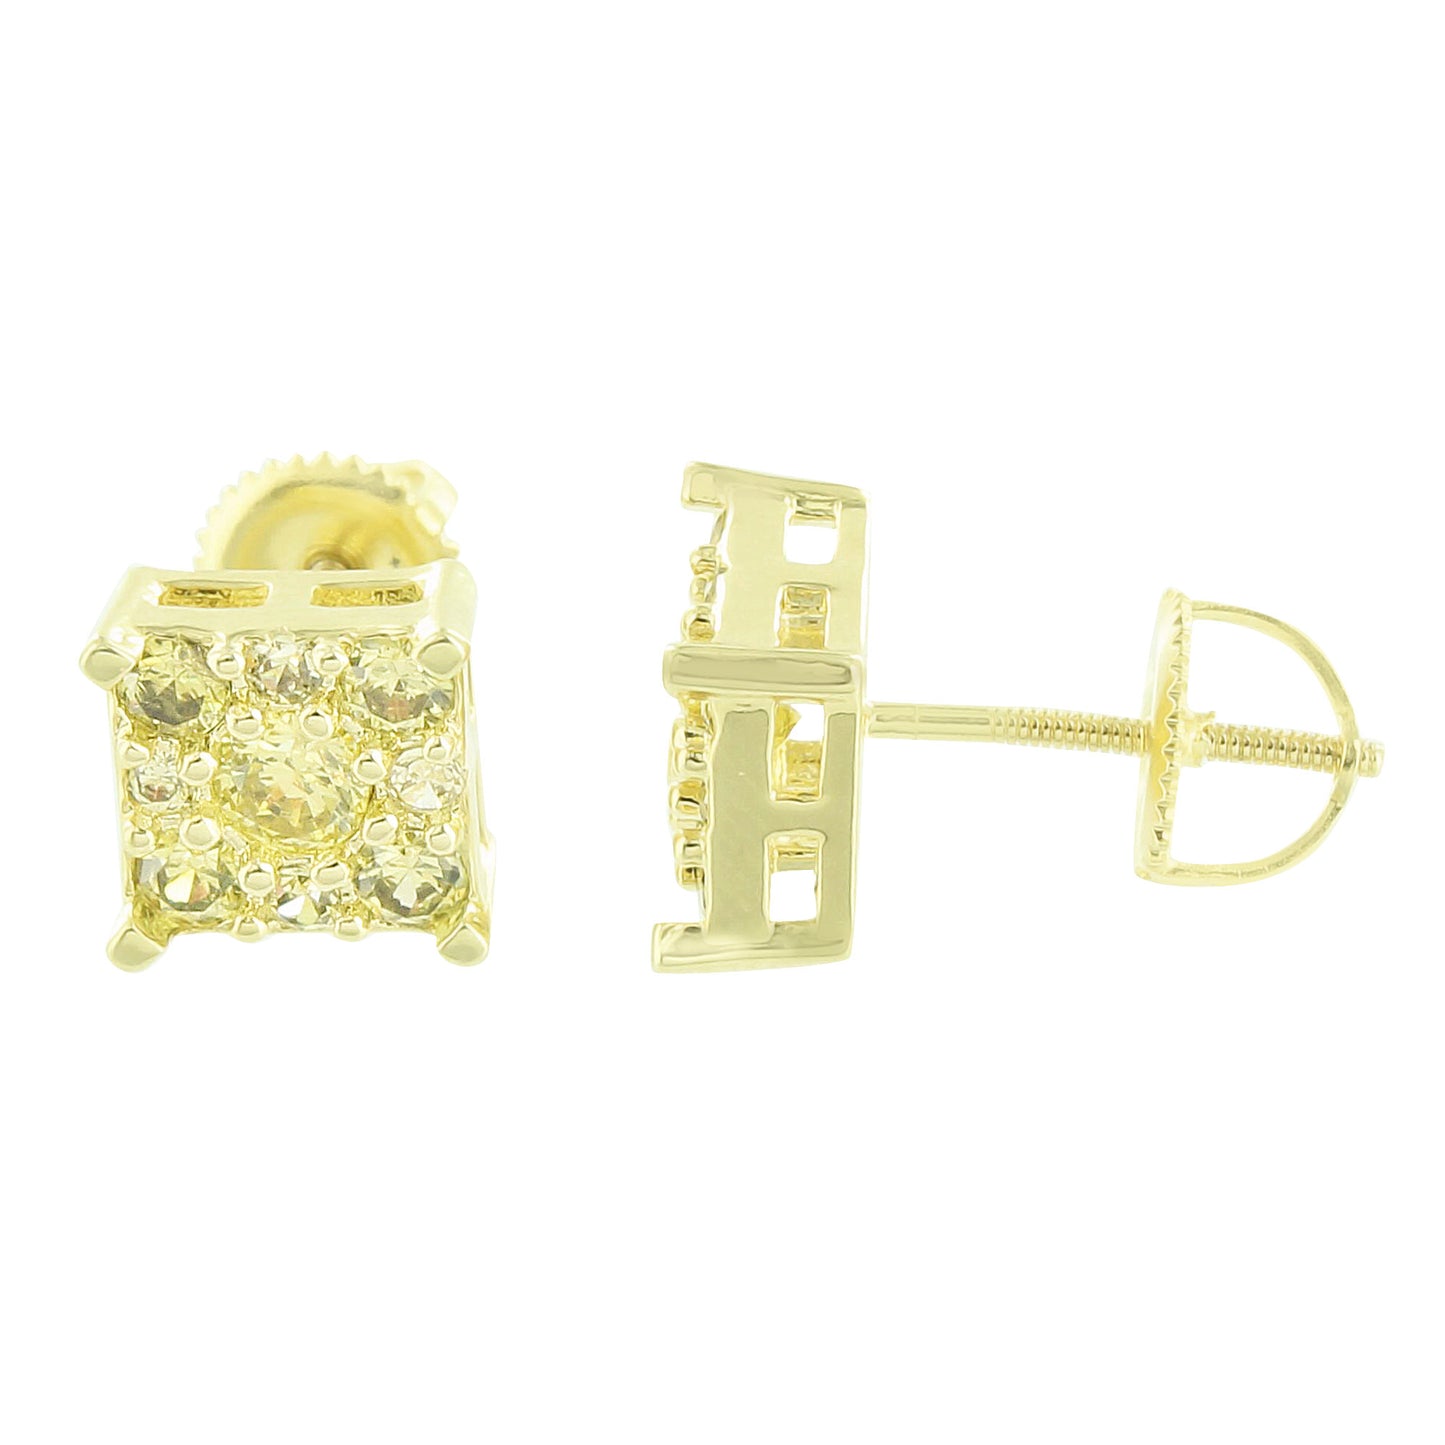 Canary Earrings Screw Back Cluster Set 14k Yellow Gold Finish